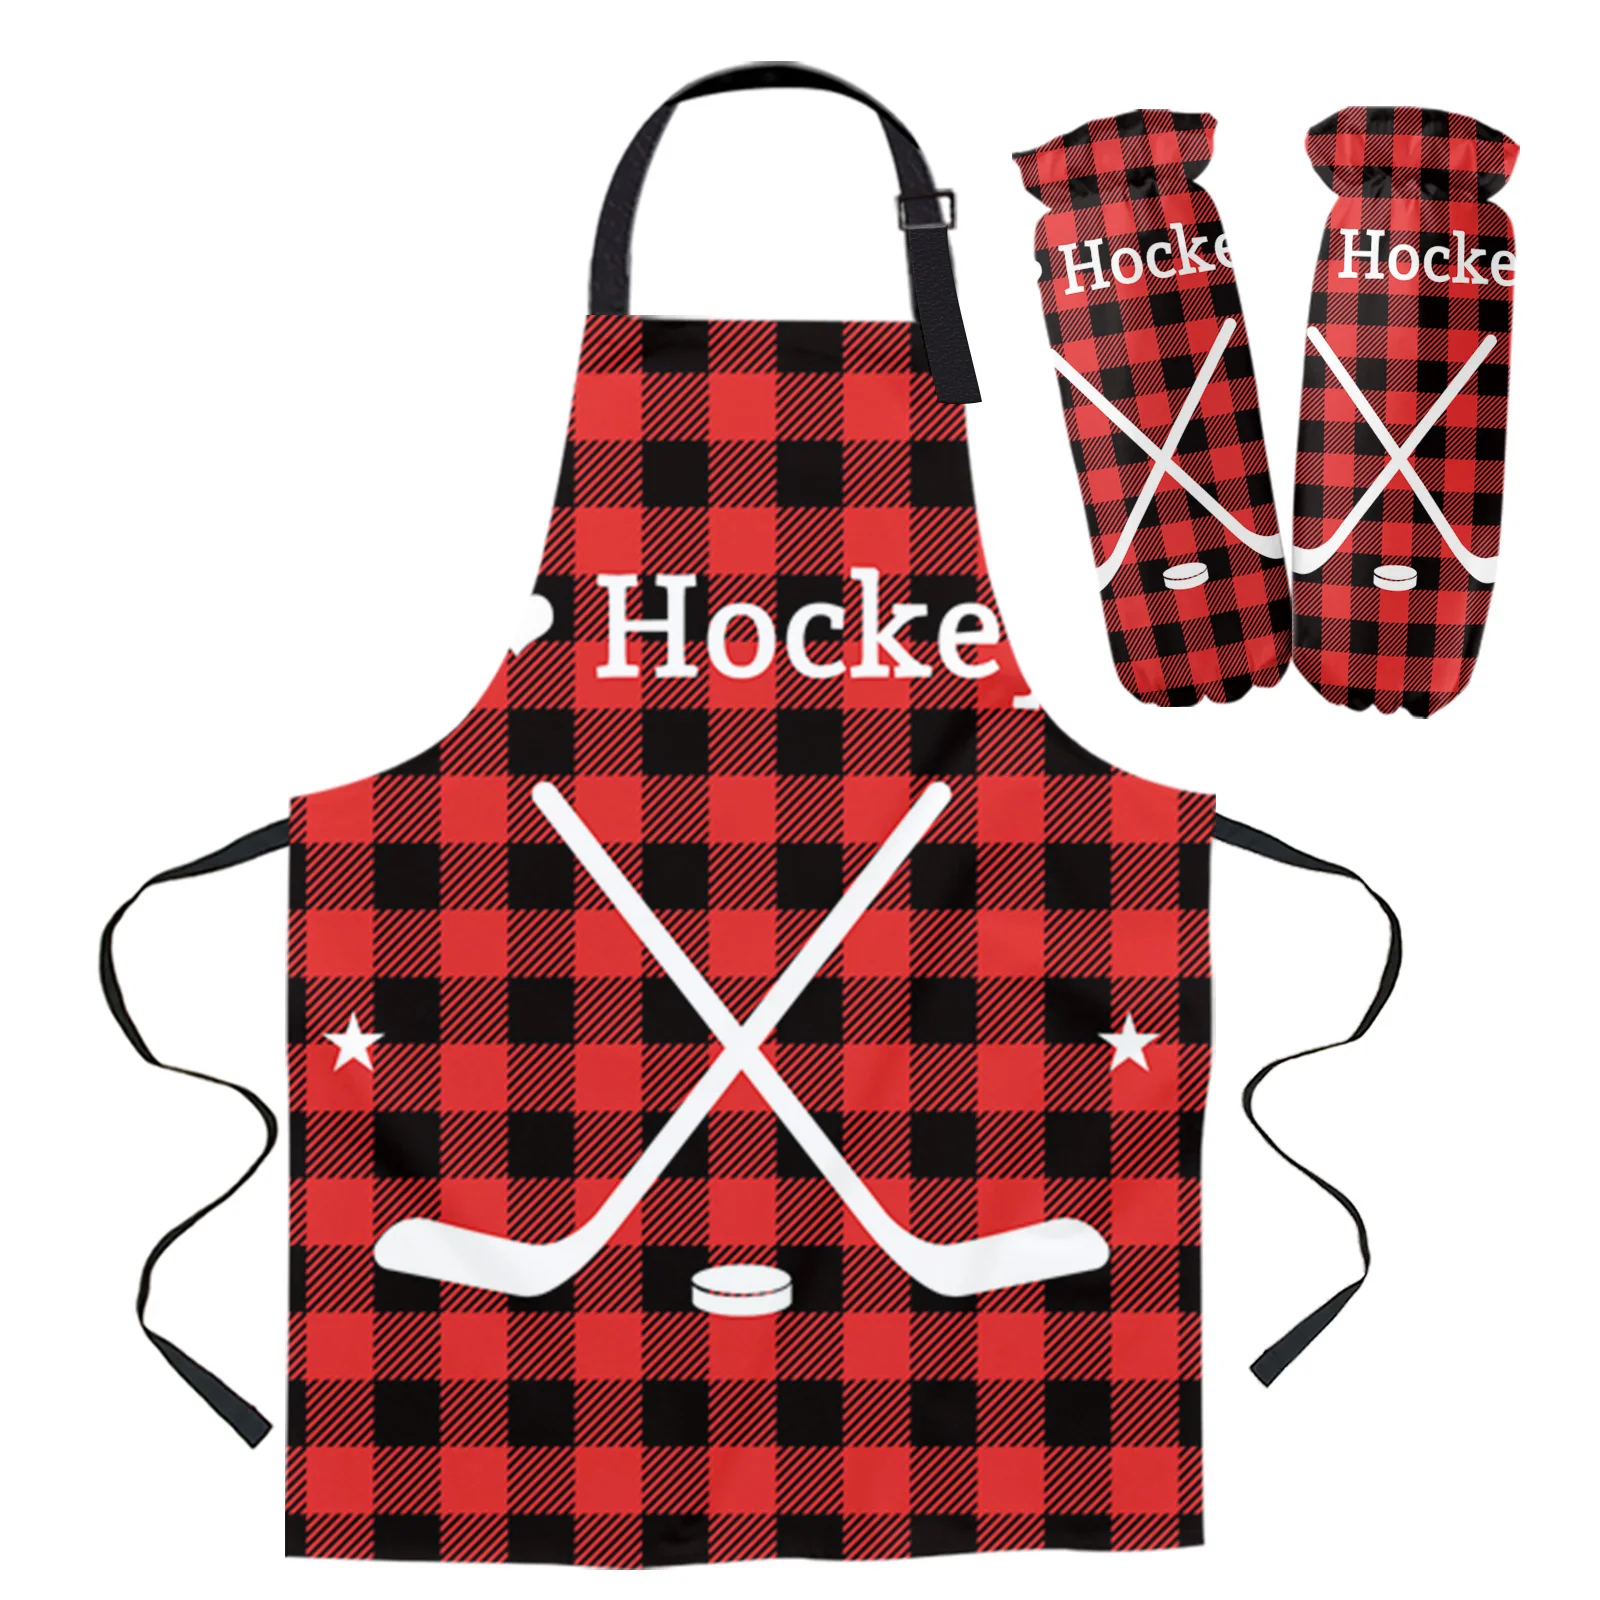 Sport Hockey I Love Hockey Red Plaid Background Apron Kitchen Baking Accessories Kitchen Bib For Cooking Apron Cuff Kit Aprons